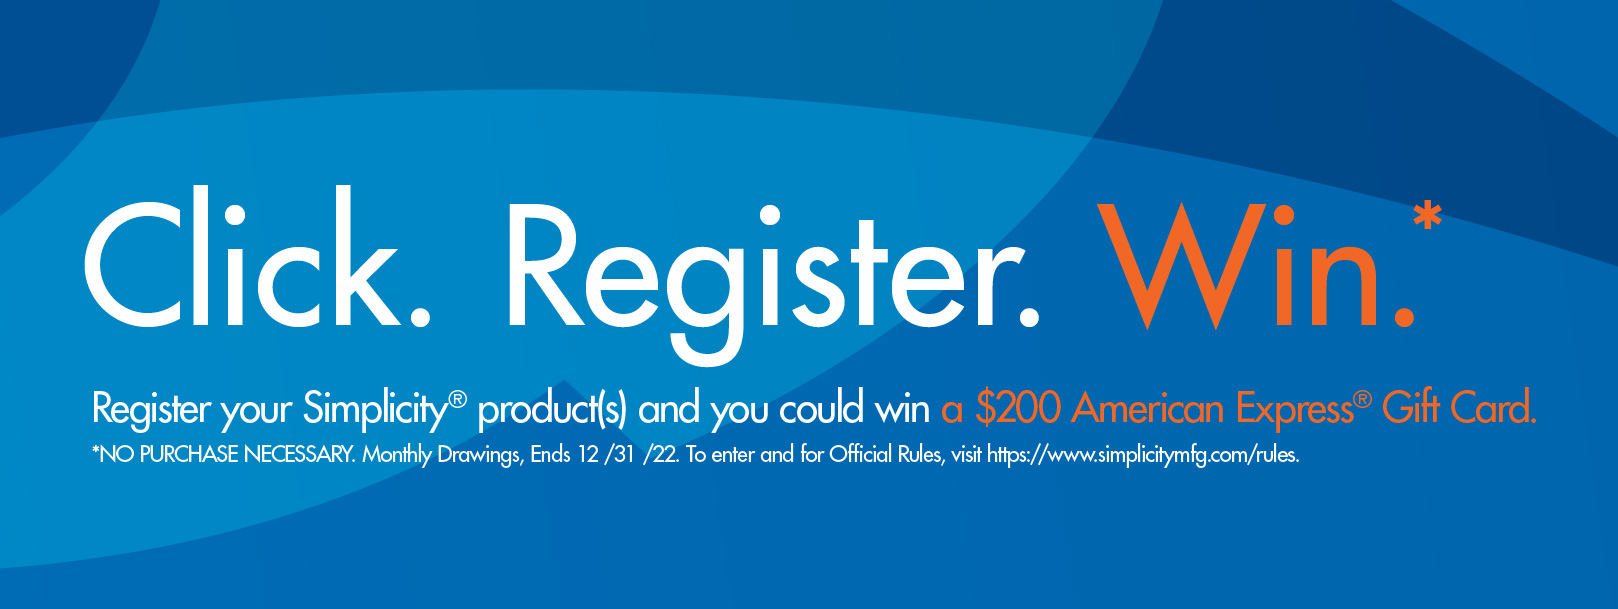 Click. Register. Win Sweepstakes text